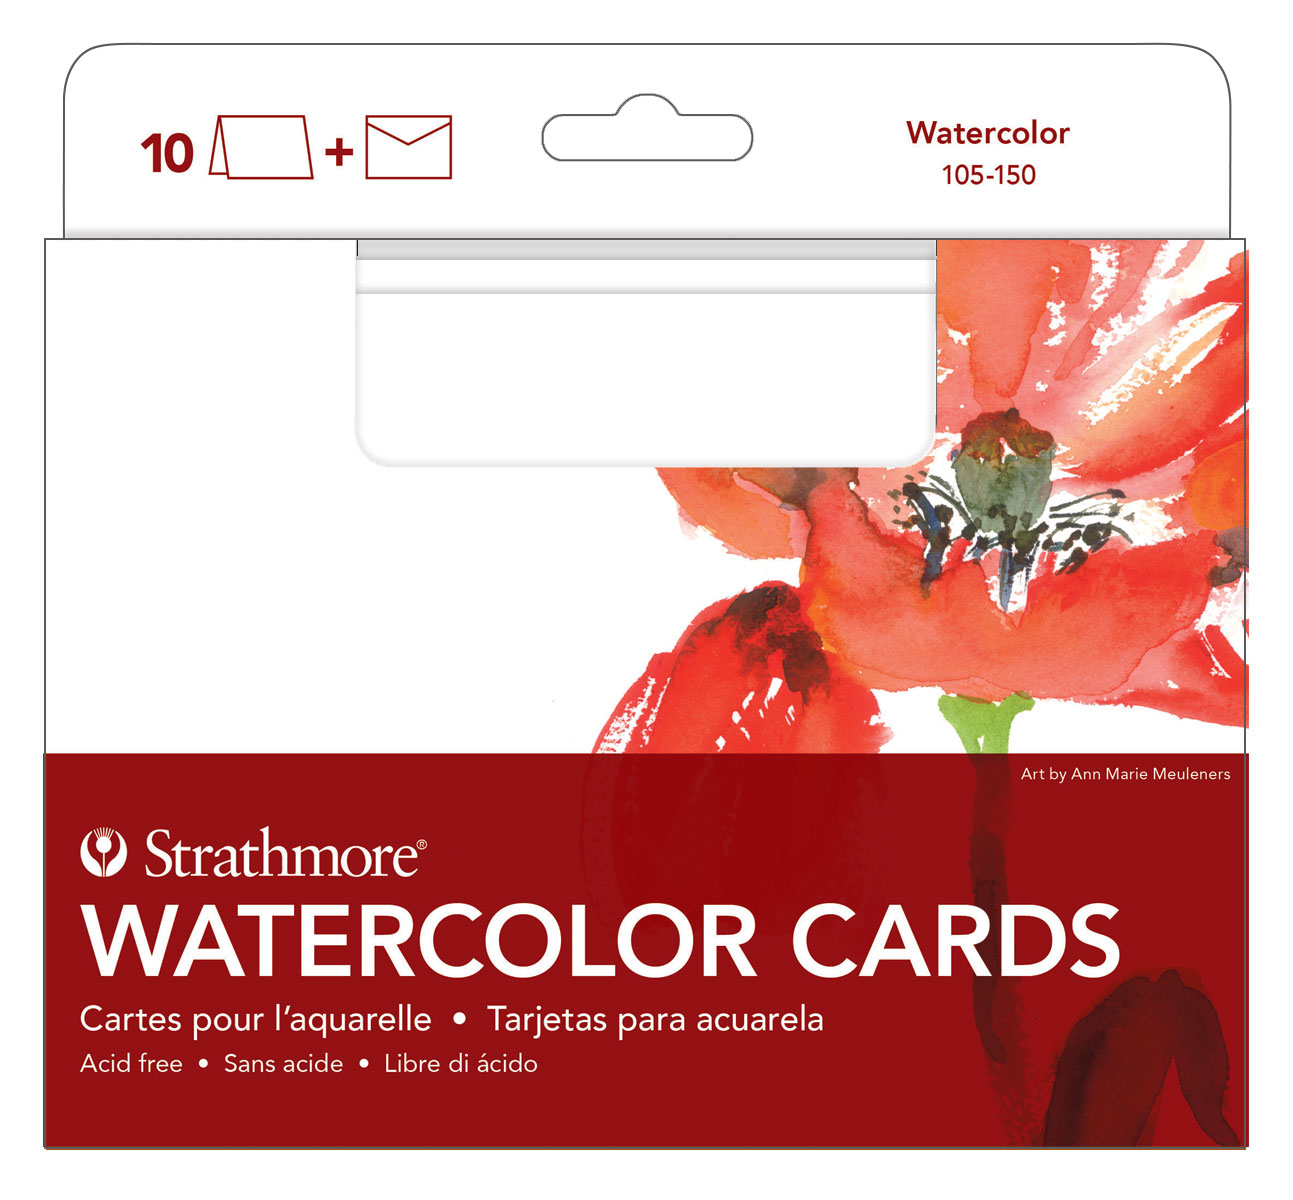 Watercolor Cards - Strathmore Artist Papers